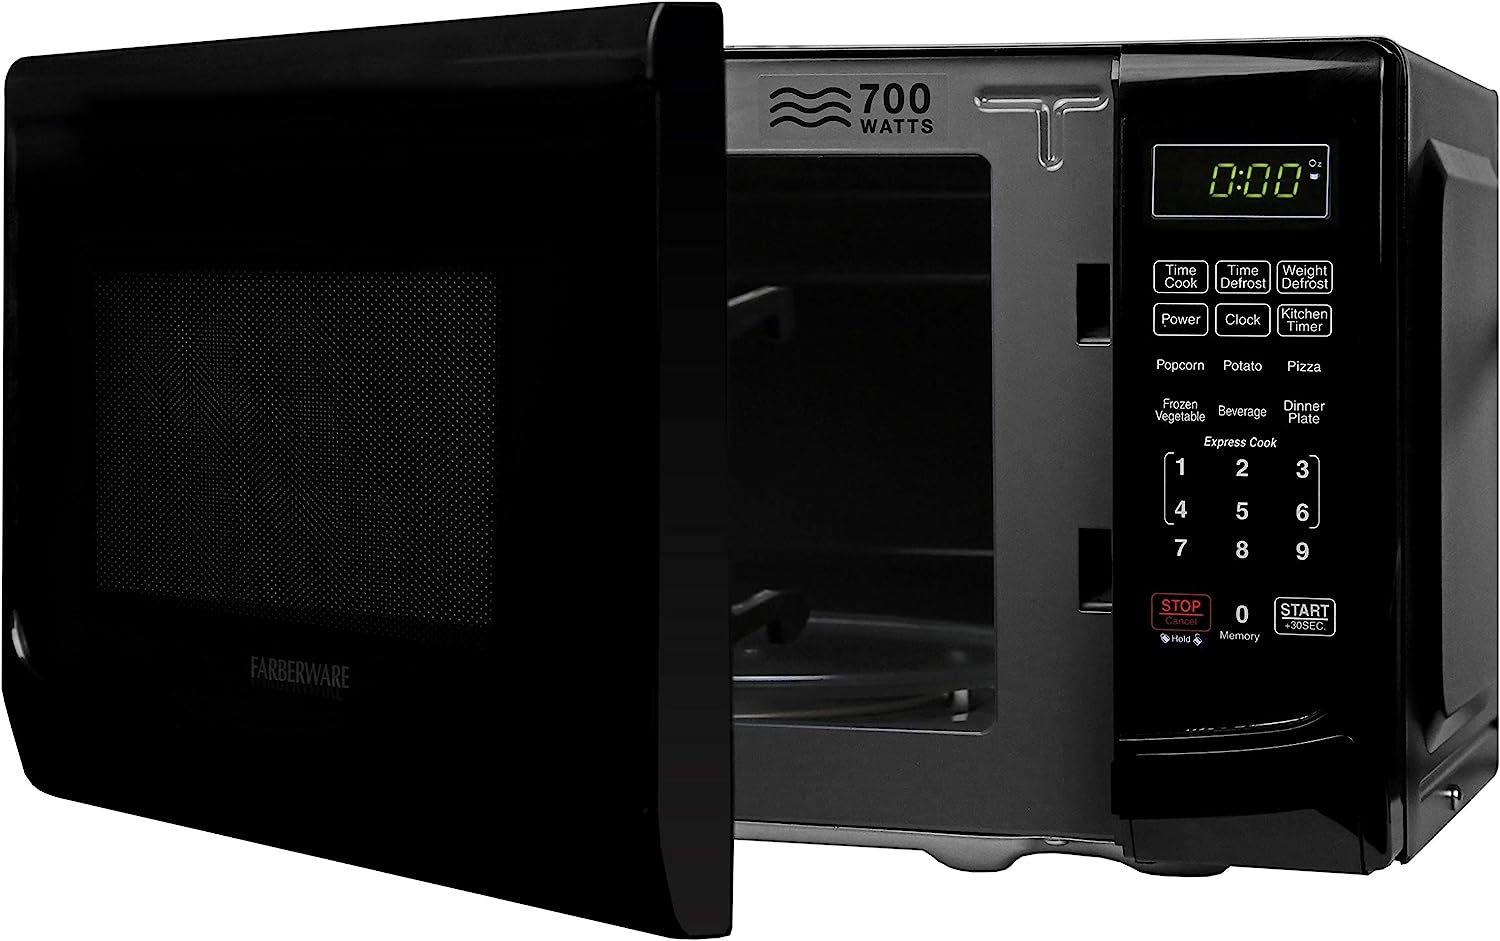  Farberware Countertop Microwave 700 Watts, 0.7 cu ft - Microwave  Oven With LED Lighting and Child Lock - Perfect for Apartments and Dorms -  Easy Clean Grey Interior, Retro Black: Home & Kitchen